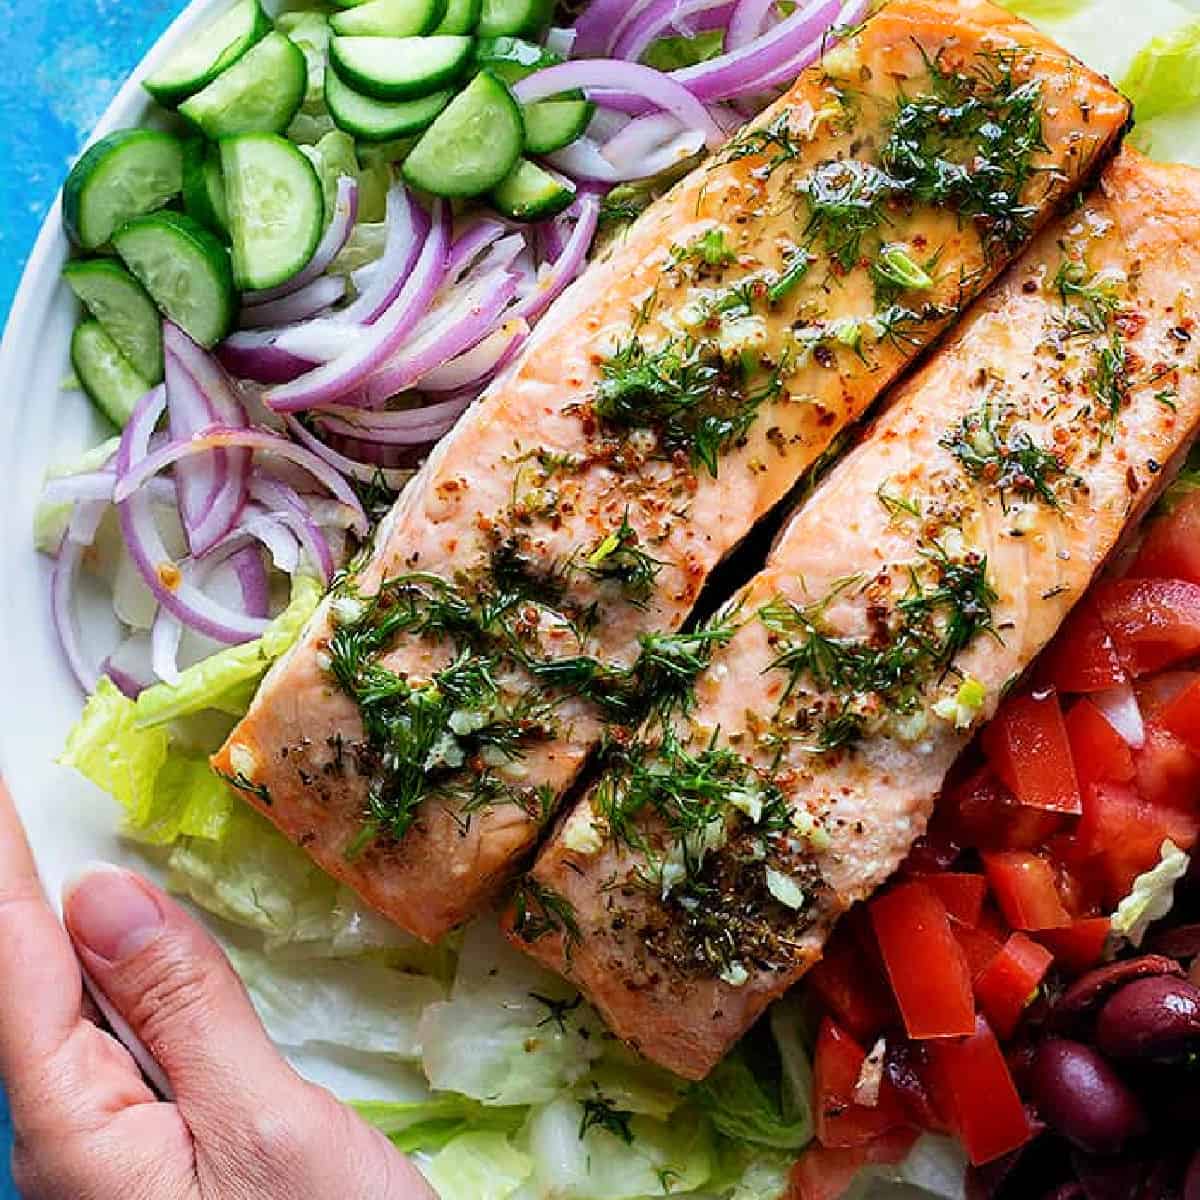 Ready in 30 minutes, this Greek salmon salad is perfect for lunch or dinner. You only need a few ingredients and some good salmon to make it!
